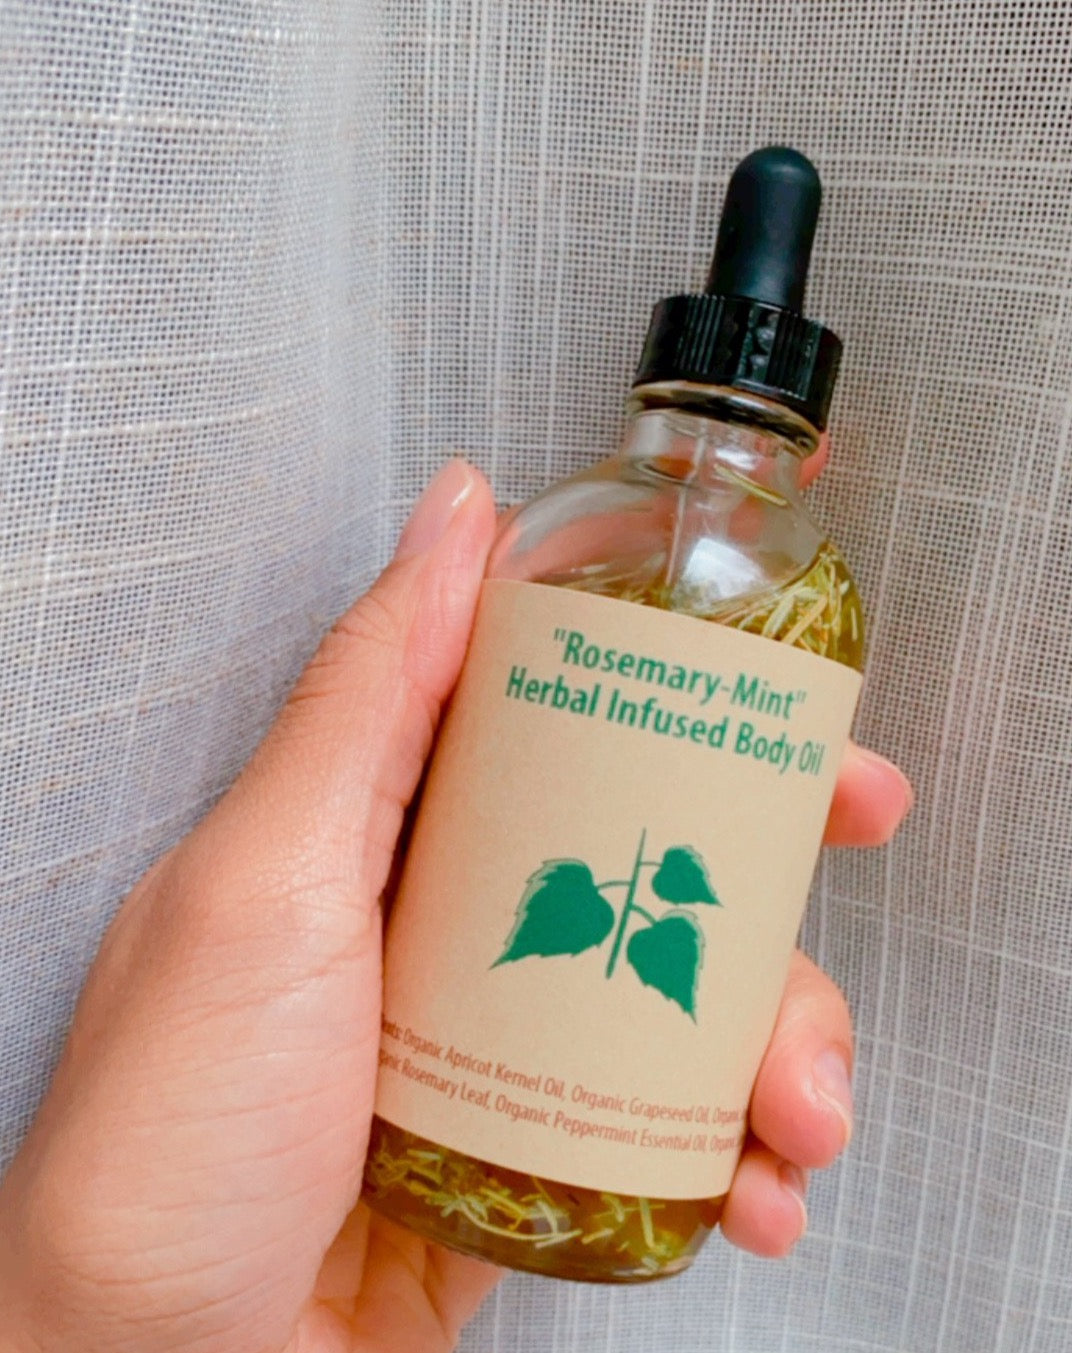 "Rosemary-Mint" Herbal Infused Body Oil